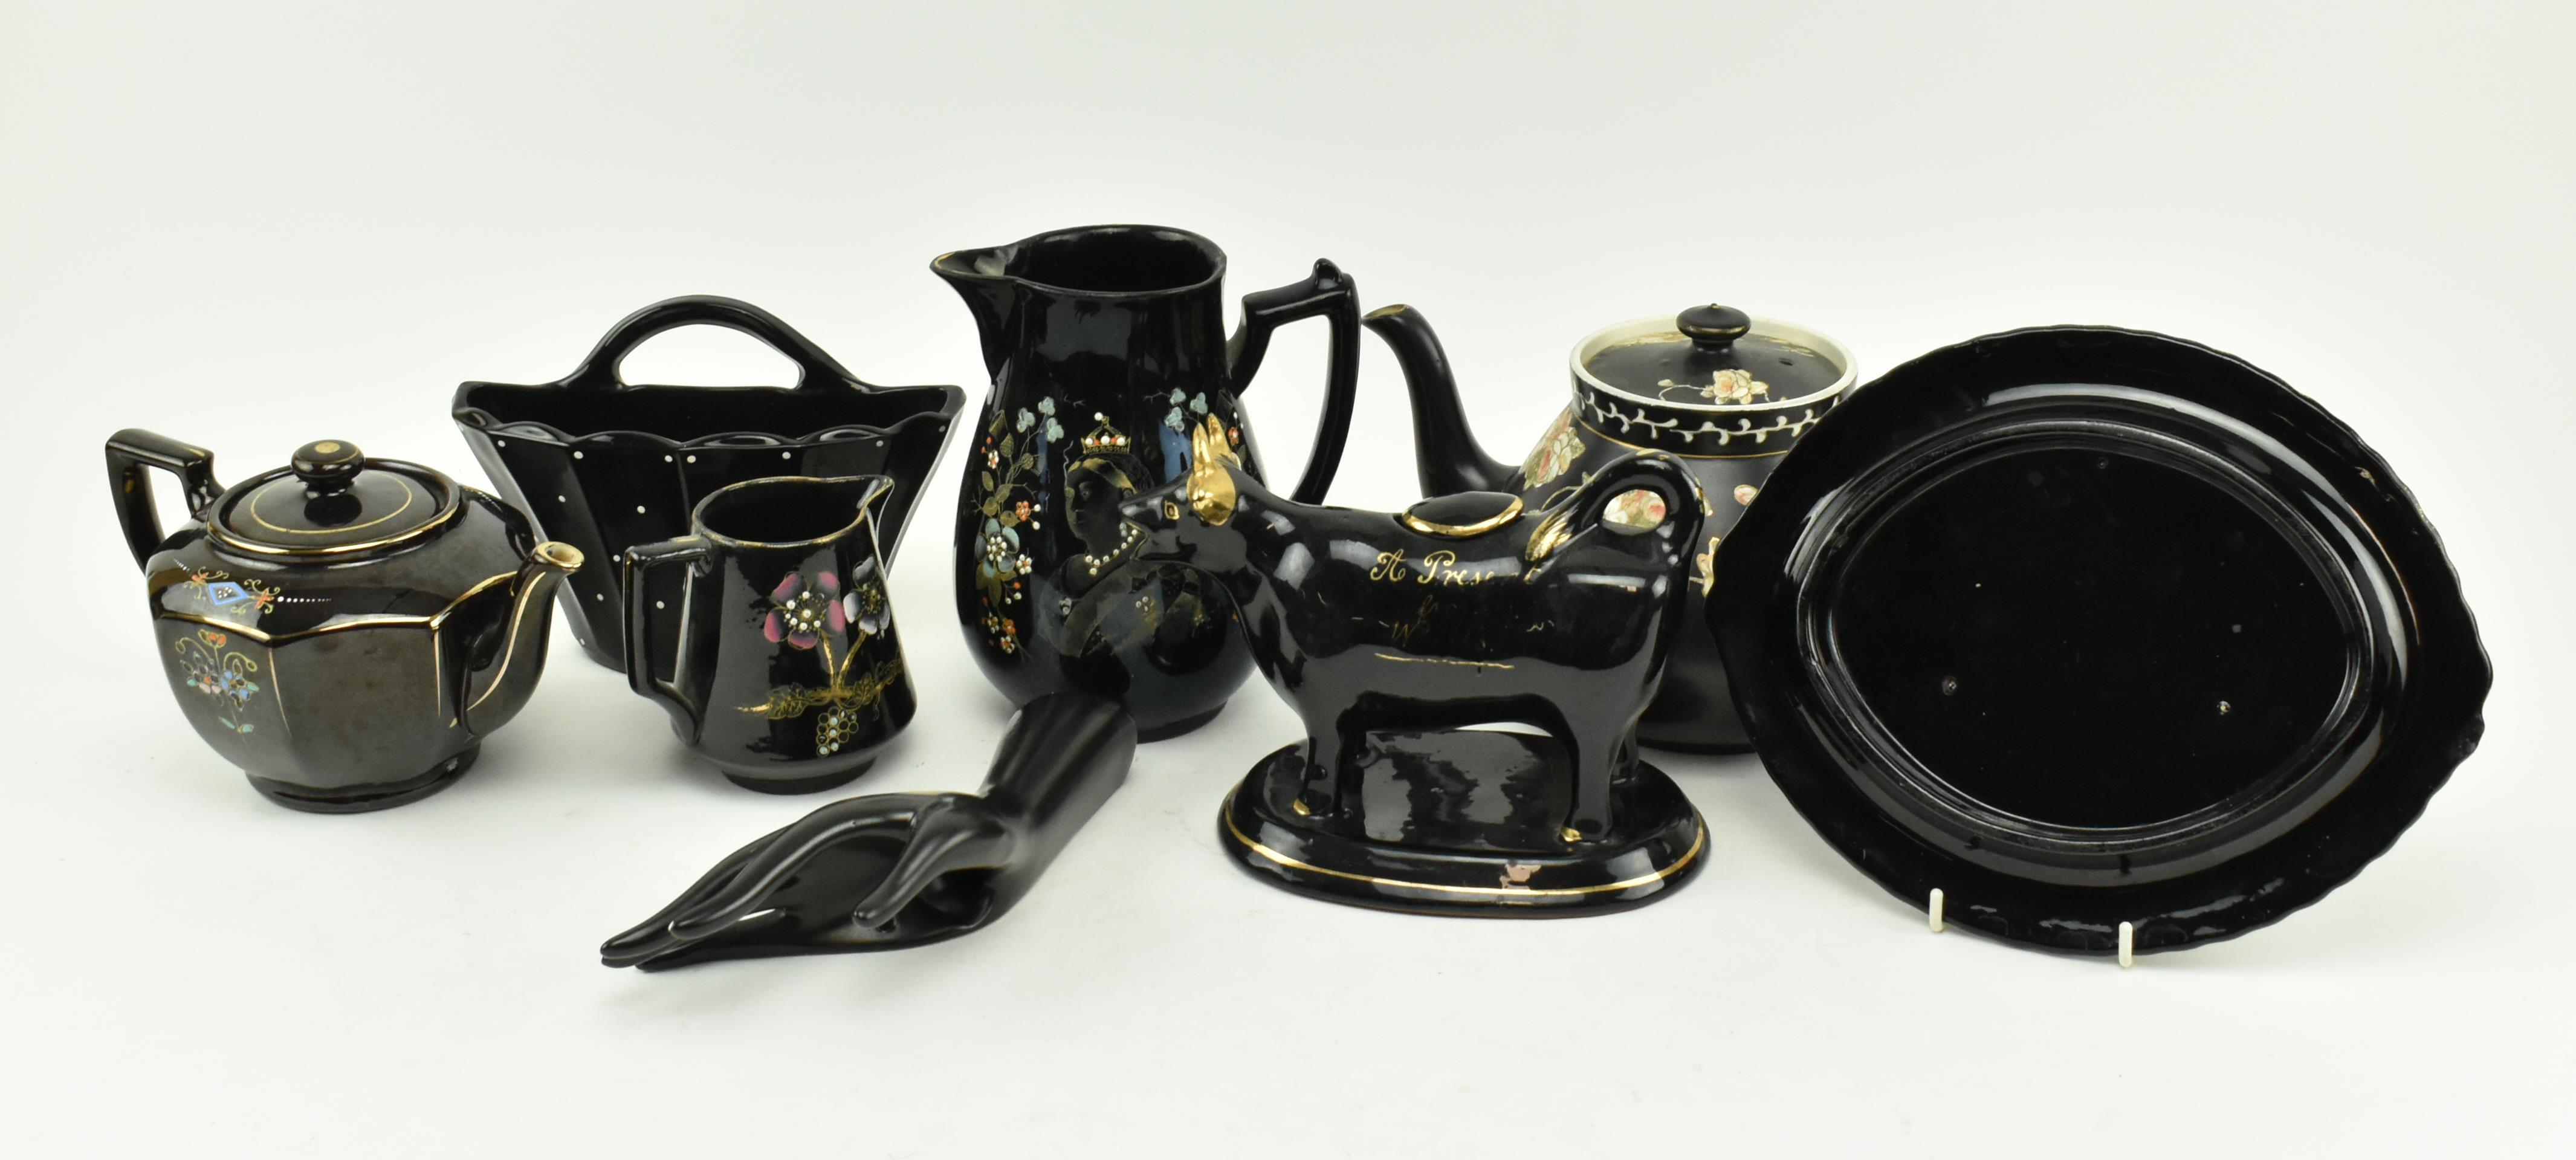 COLLECTION OF BLACK CERAMIC & GLASS LACQUER STYLE PIECES